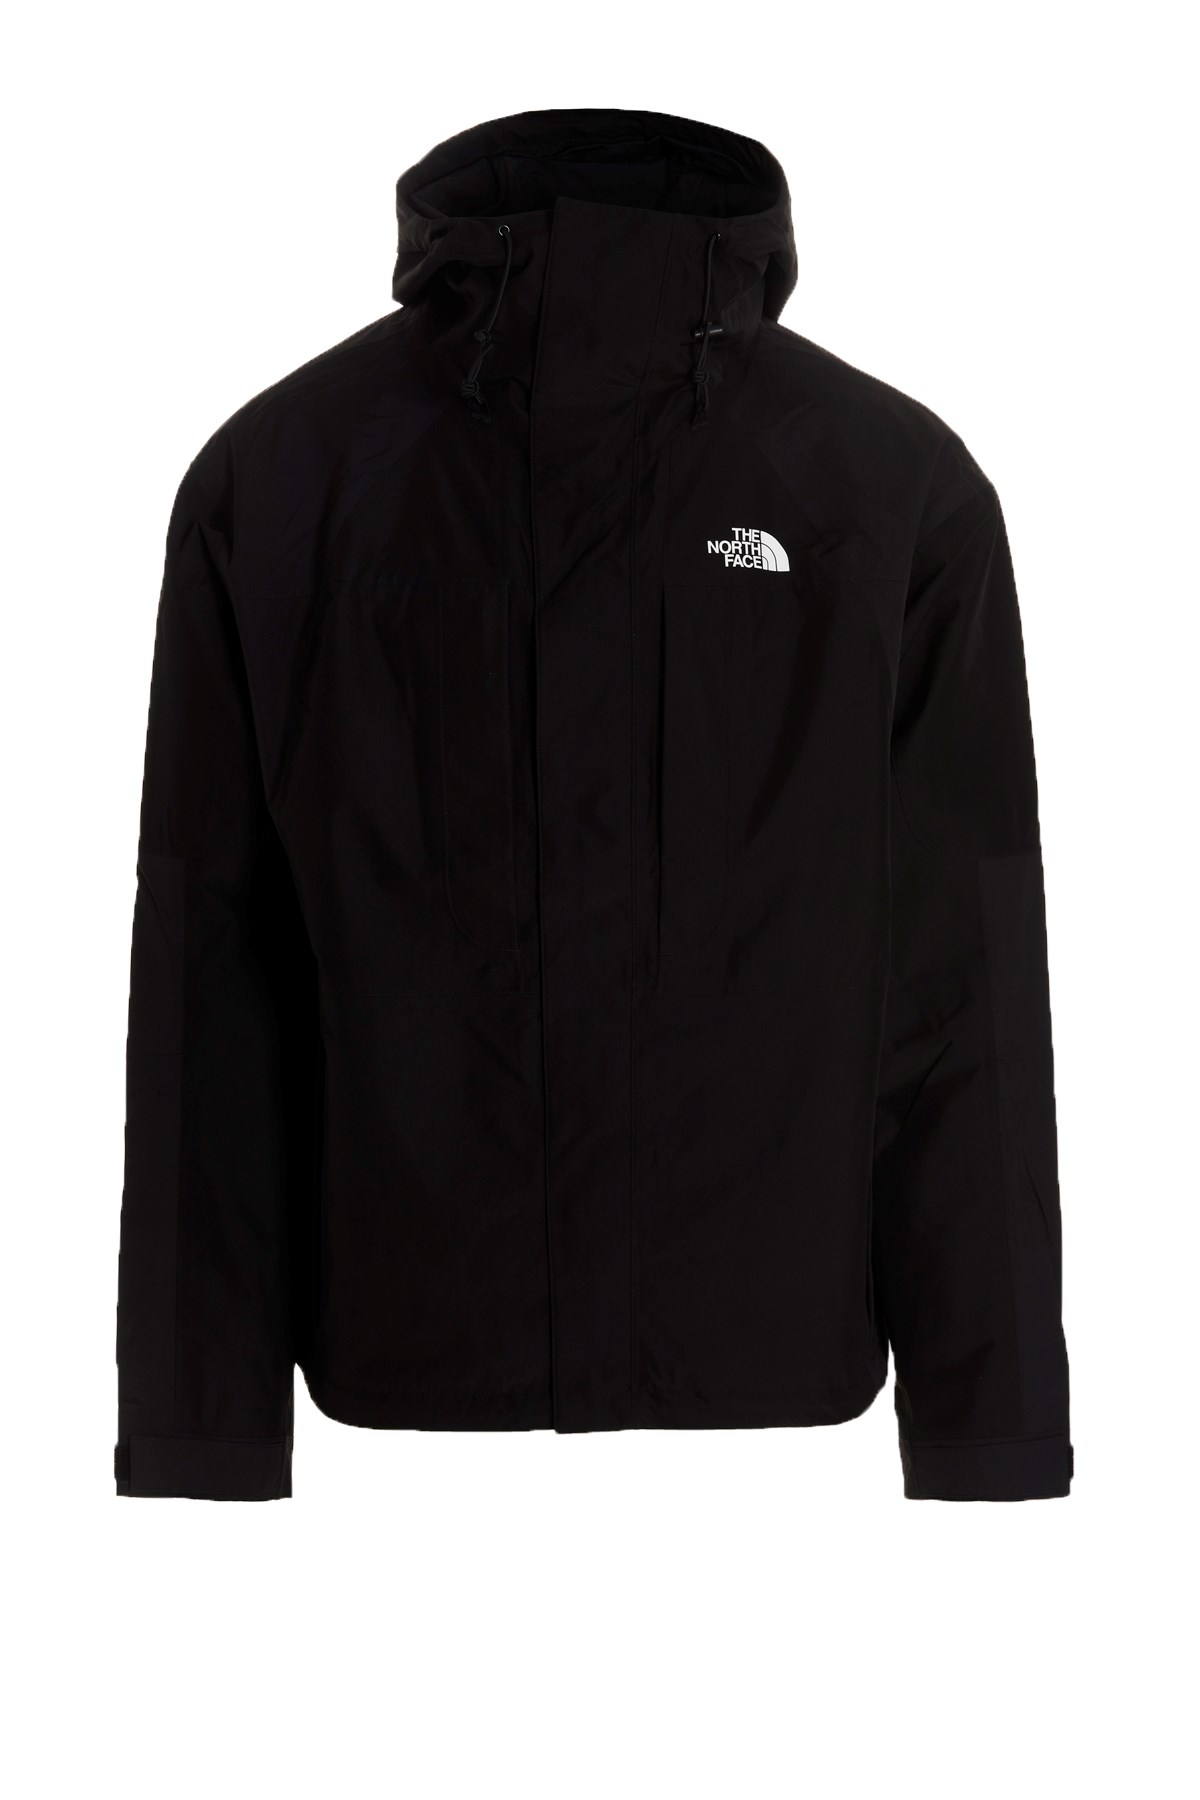 THE NORTH FACE Jacke '2000 Mountain'